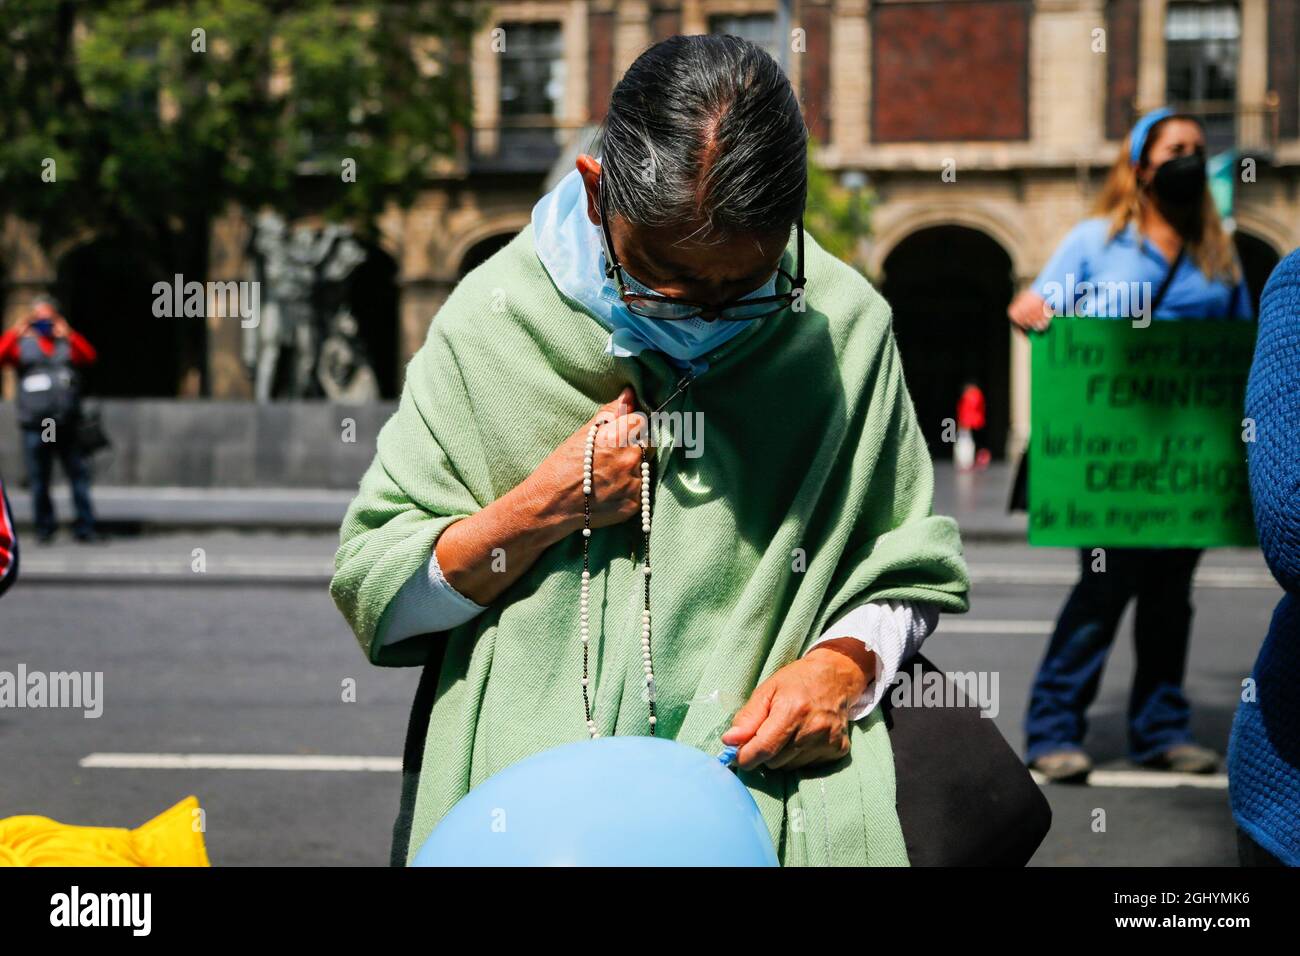 Mexico City, Mexico. 06th Sep, 2021. A protester prays on her knees outside of the Supreme Court of Justice, during the demonstration. Pro-life protesters in a session demonstrated against the decriminalization of abortion in Coahuila and Sinaloa during the first stage of pregnancy. The favourable decision could lead to decriminalization throughout Mexico. (Photo by Guillermo Diaz/SOPA Images/Sipa USA) Credit: Sipa USA/Alamy Live News Stock Photo